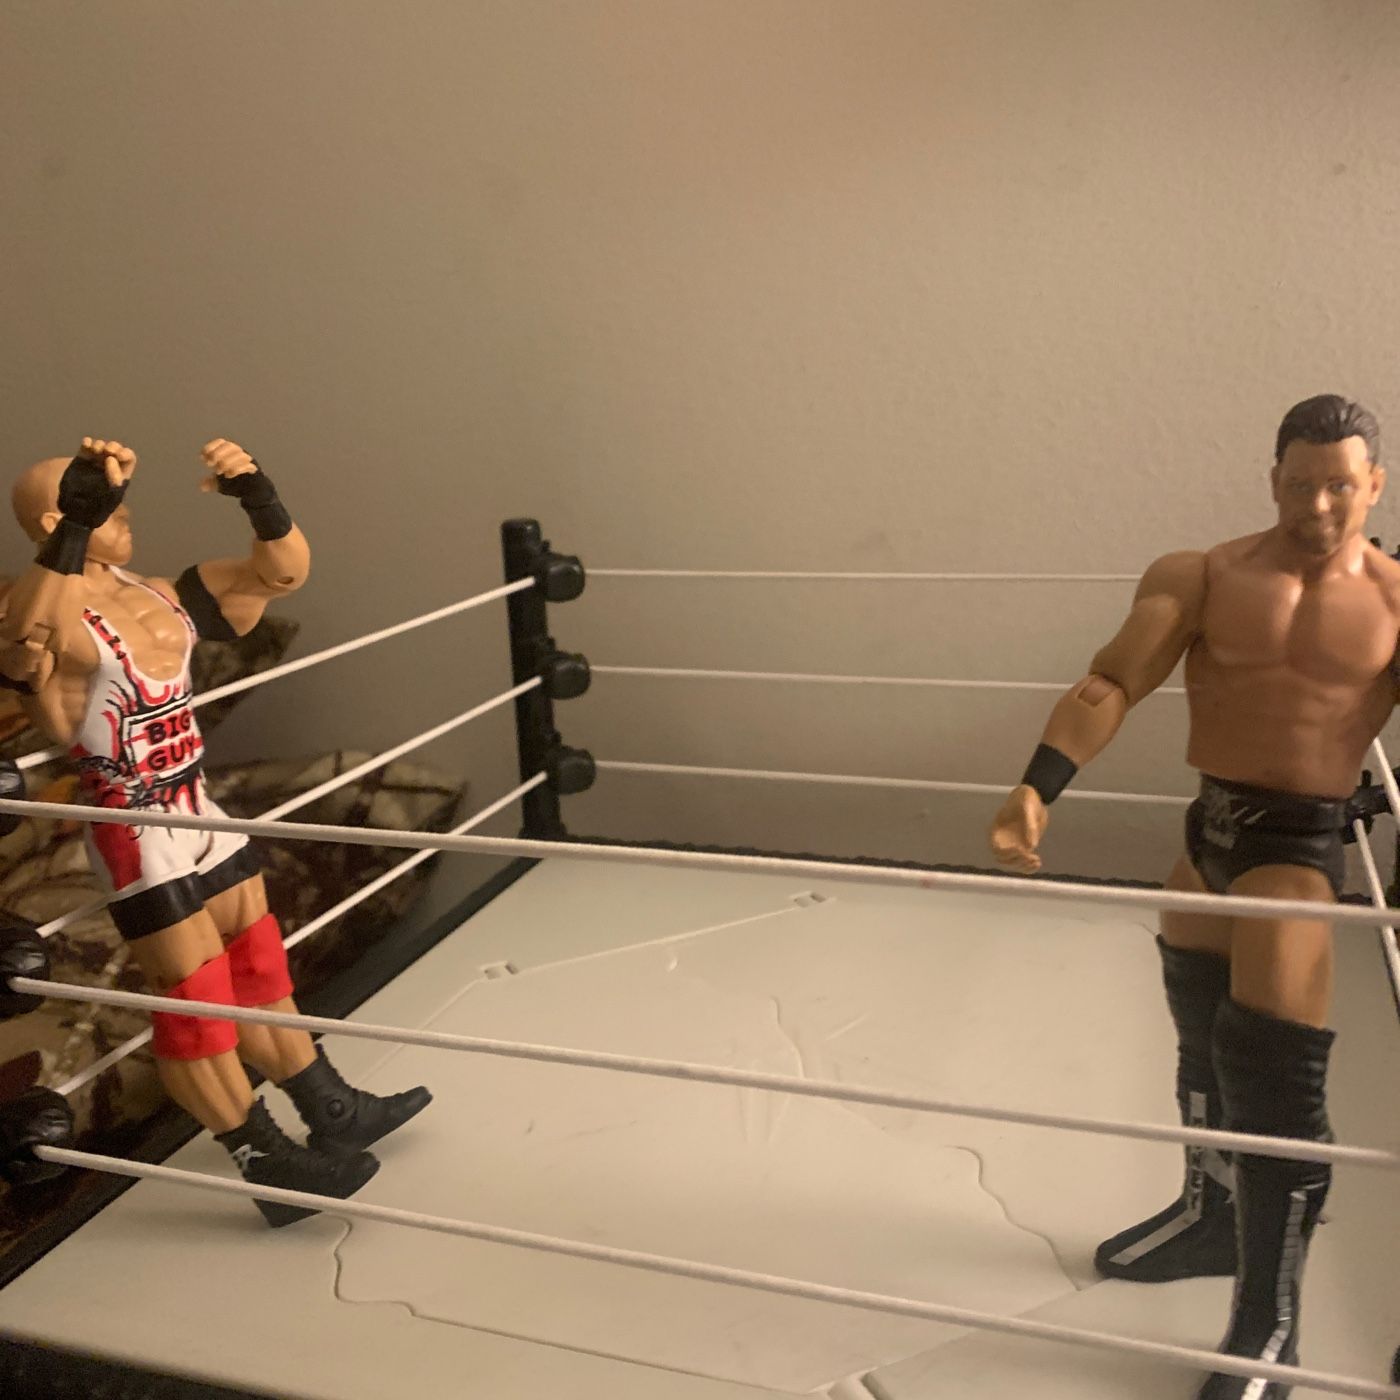 WWE STOP MOTION's show